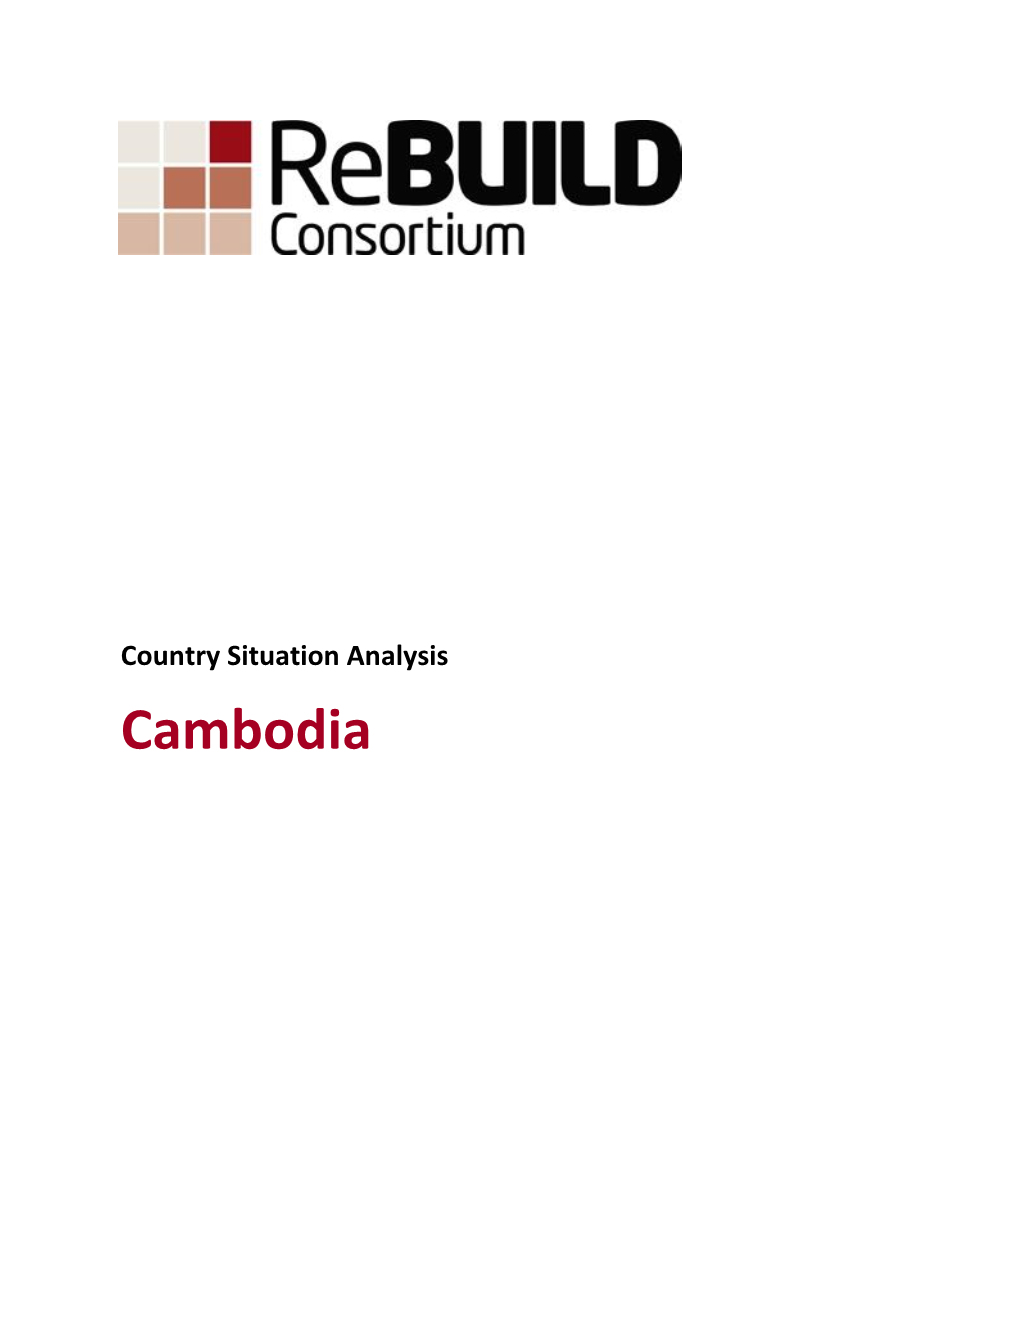 Country Situation Analysis: Cambodia